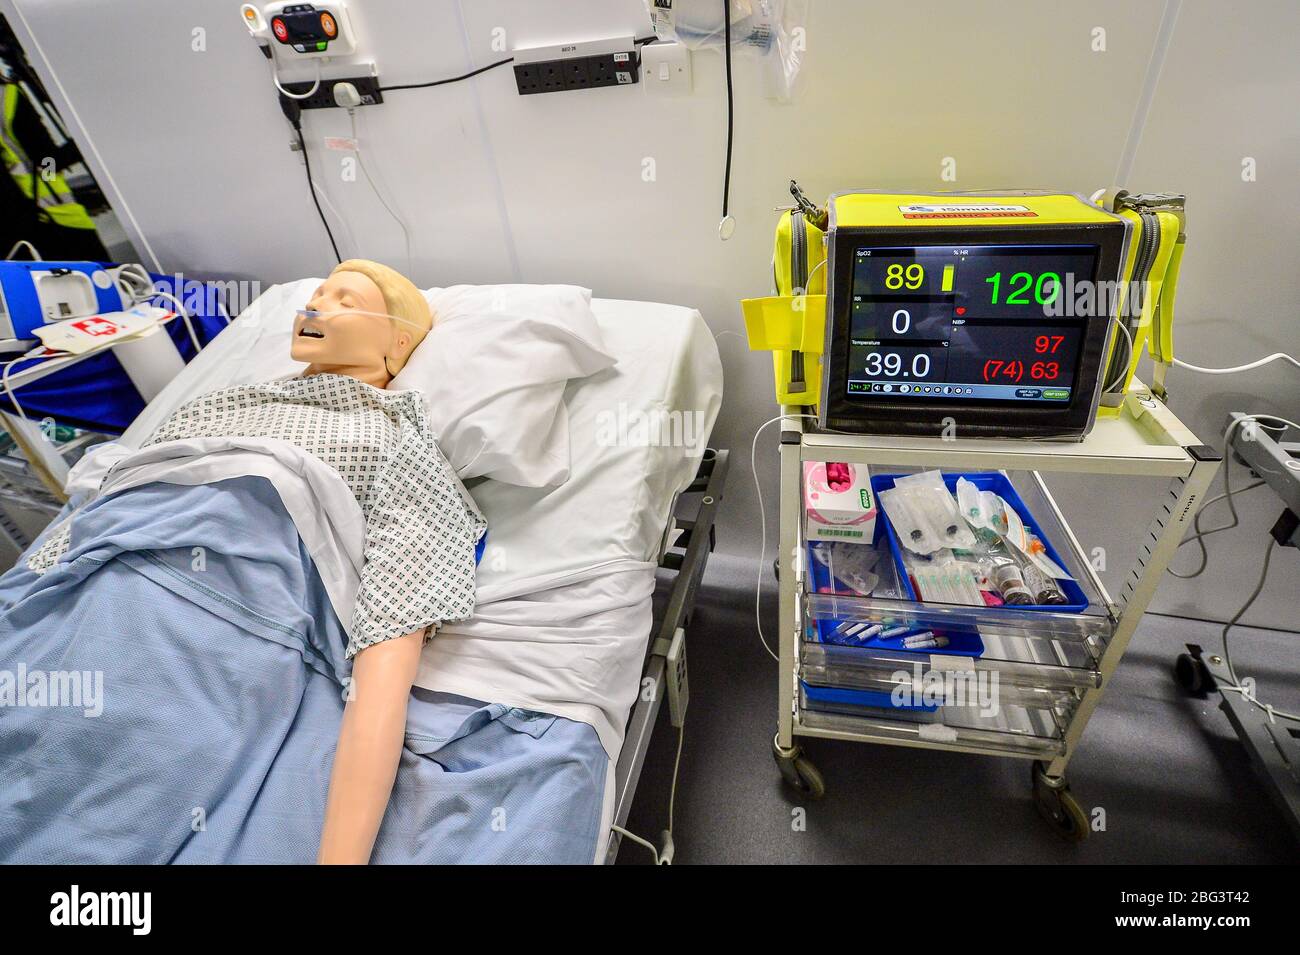 A machine simulating vital signs of a deteriorating patient is used inside a ward as part of medical training at the official opening of the new Dragon's Heart Hospital, built at the Principality Stadium, Cardiff, to care for coronavirus patients. Stock Photo